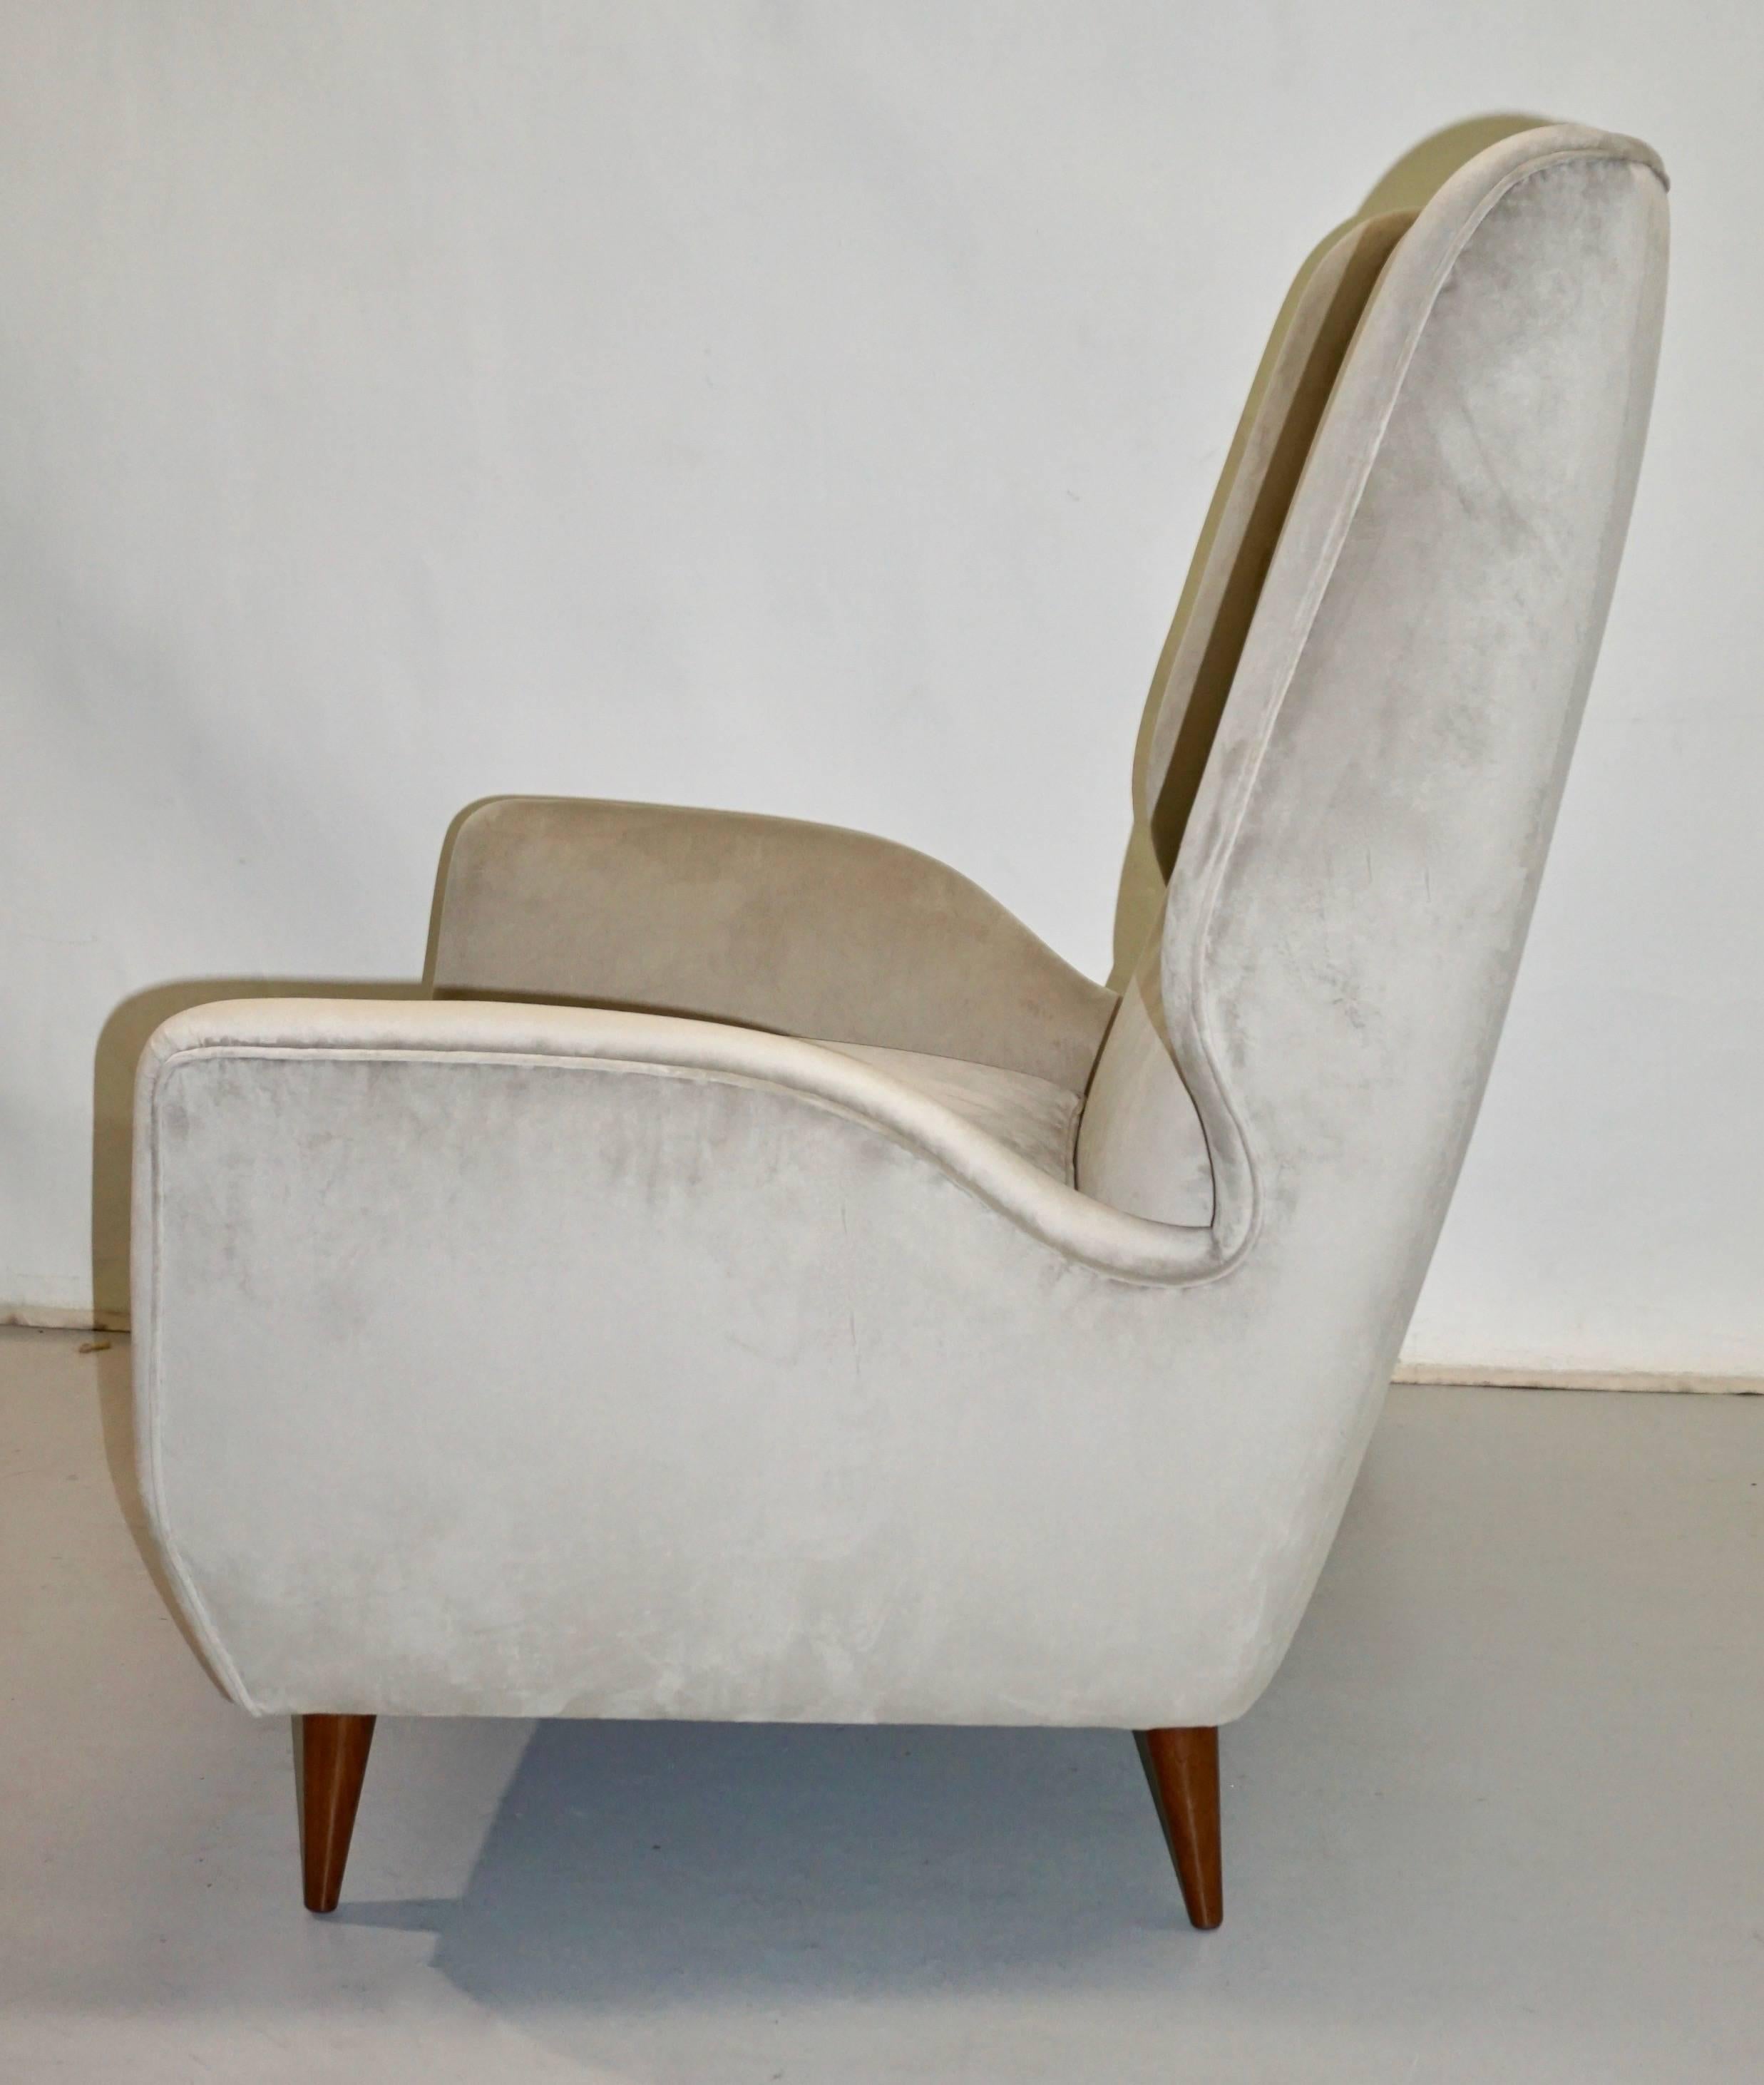 Hand-Crafted Gio Ponti Certified 1940s Italian Pair of High Back Armchairs in Gray Velvet